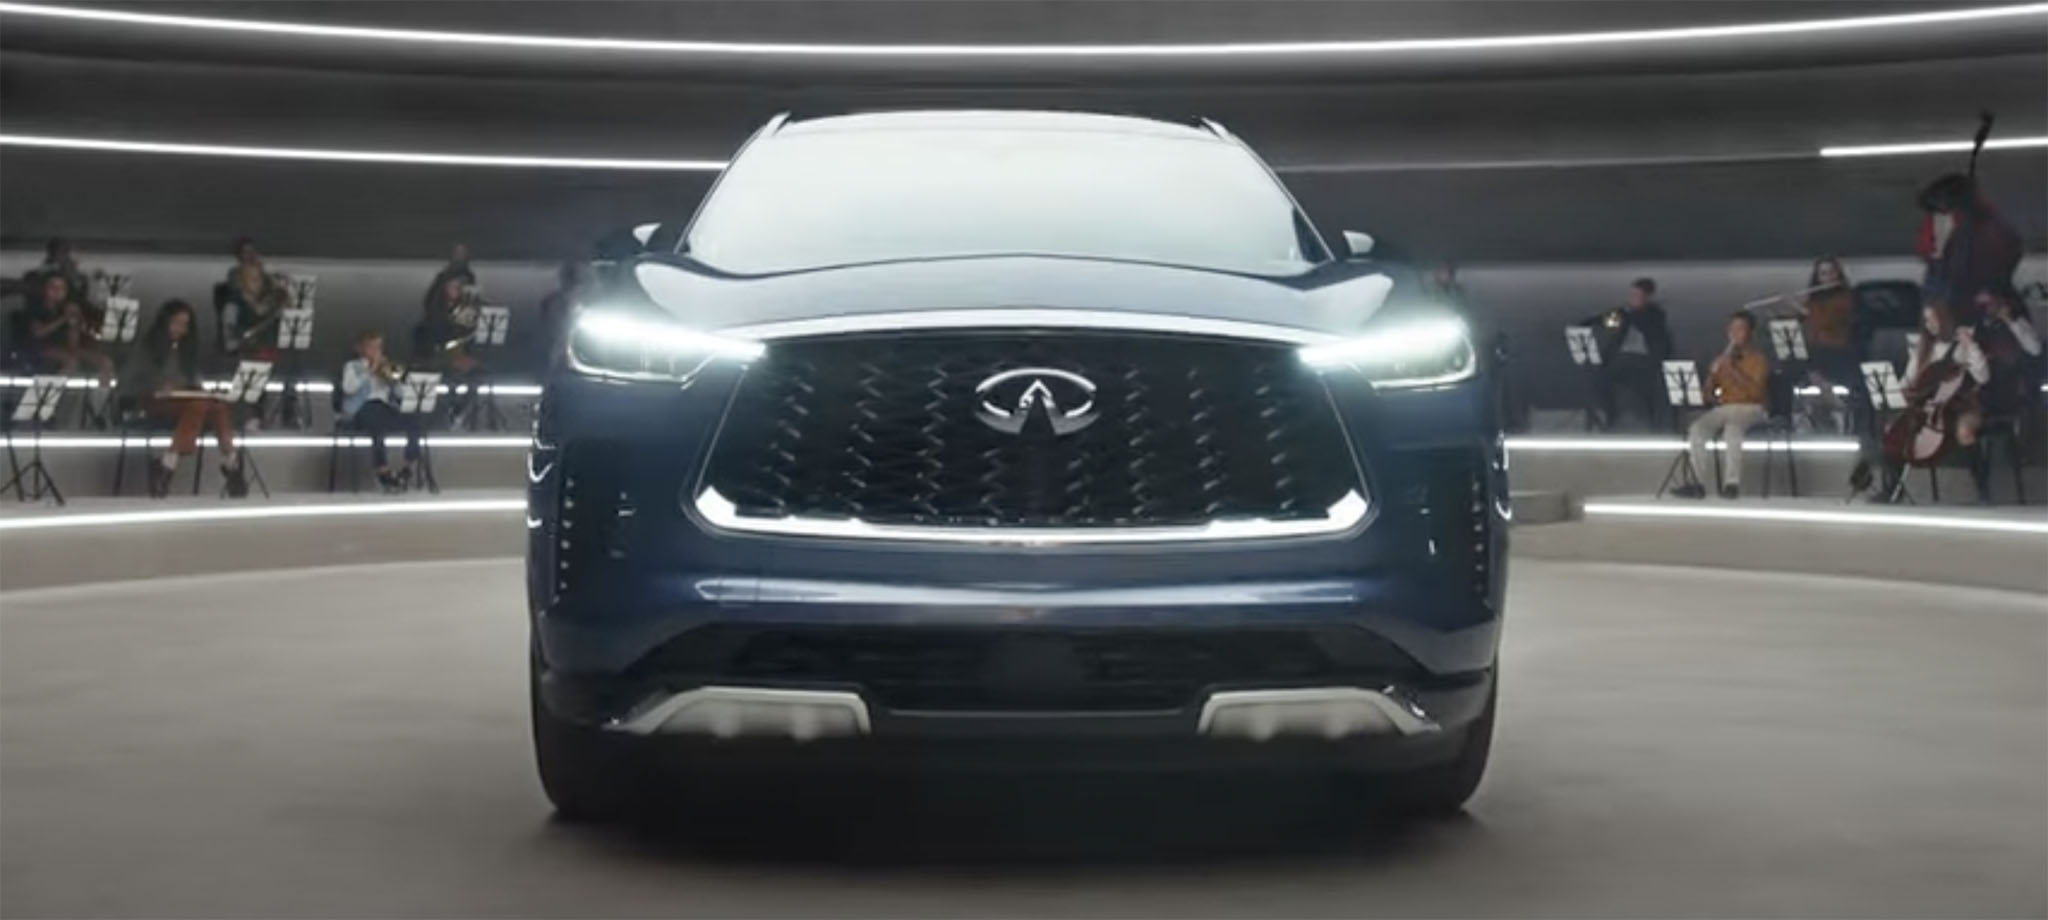 The all new INFINITI QX60 SUV has a price tag starting at around $47,000